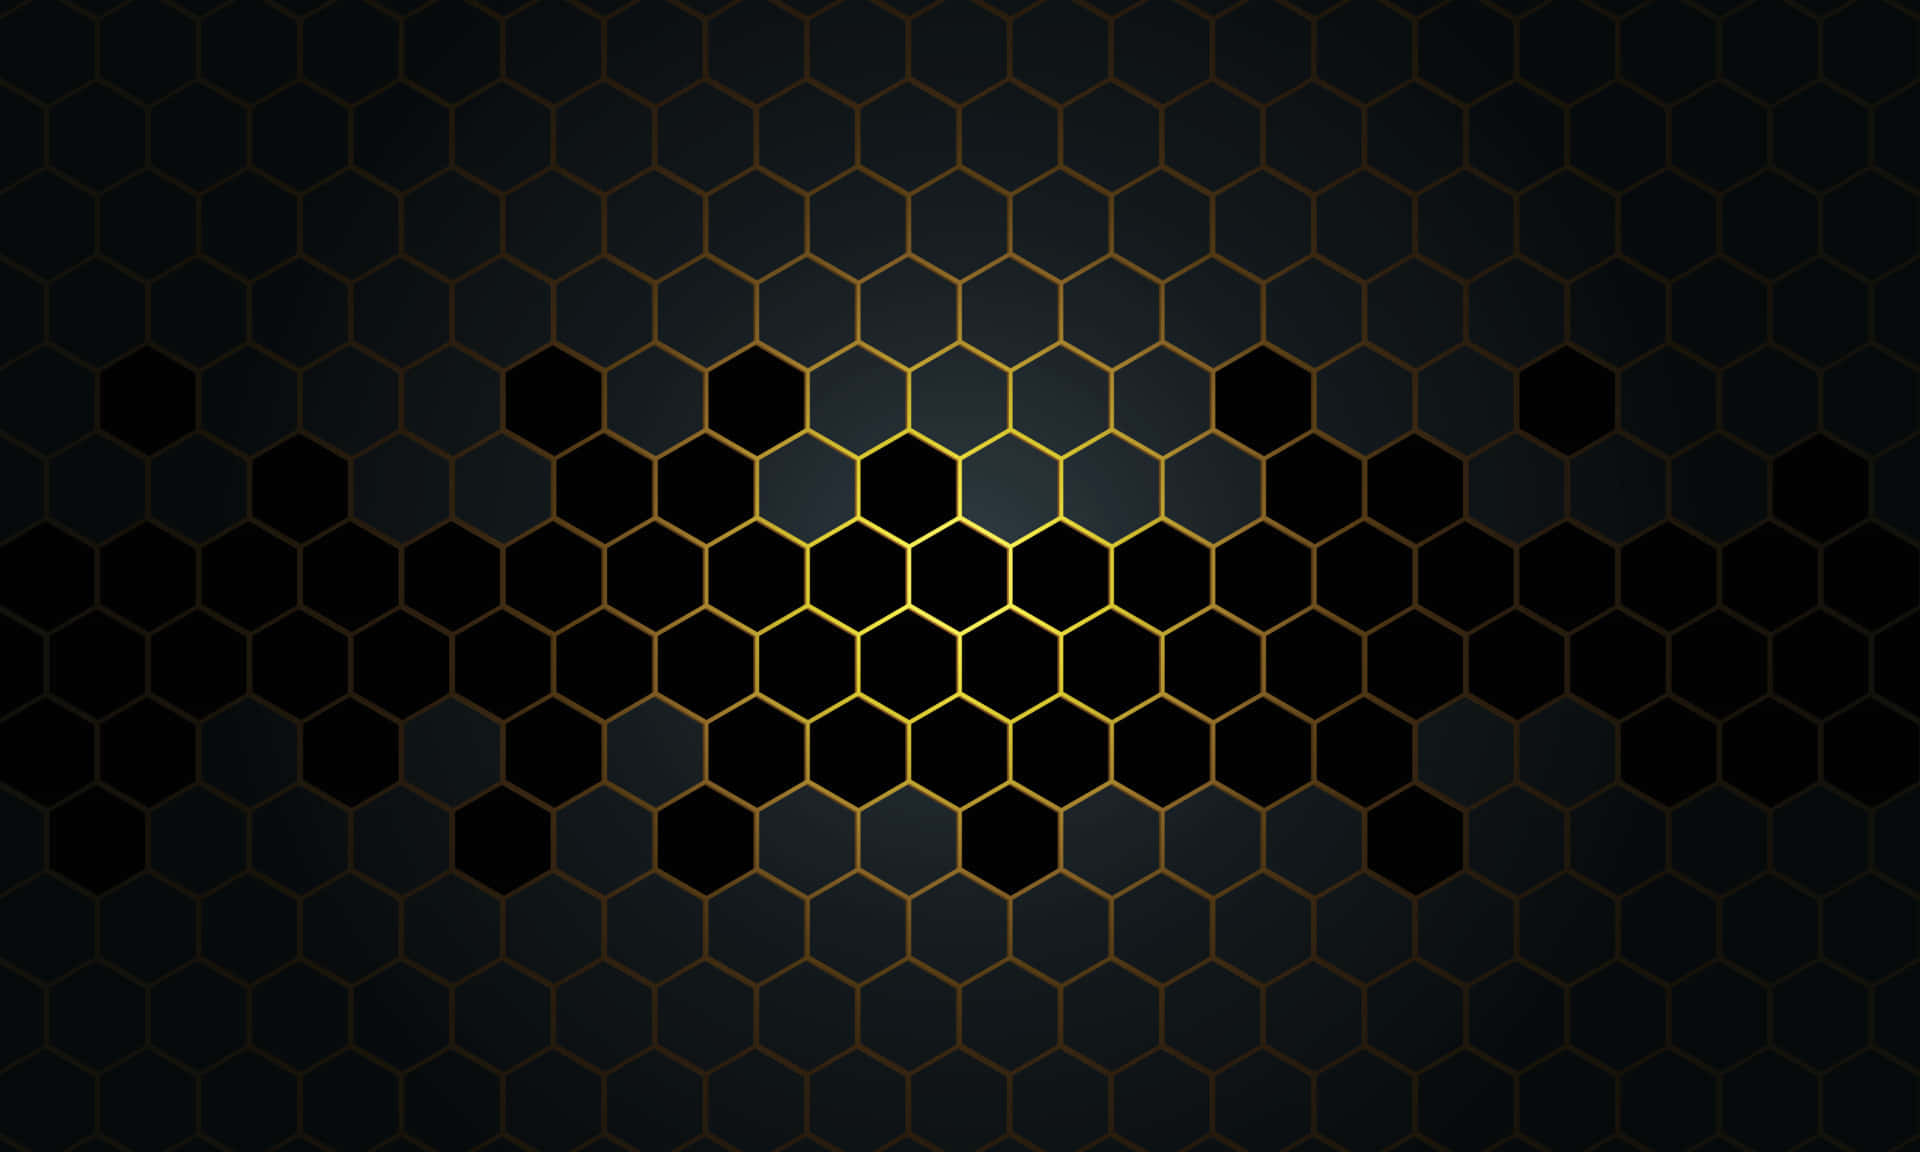 Check out this vibrant honeycomb pattern